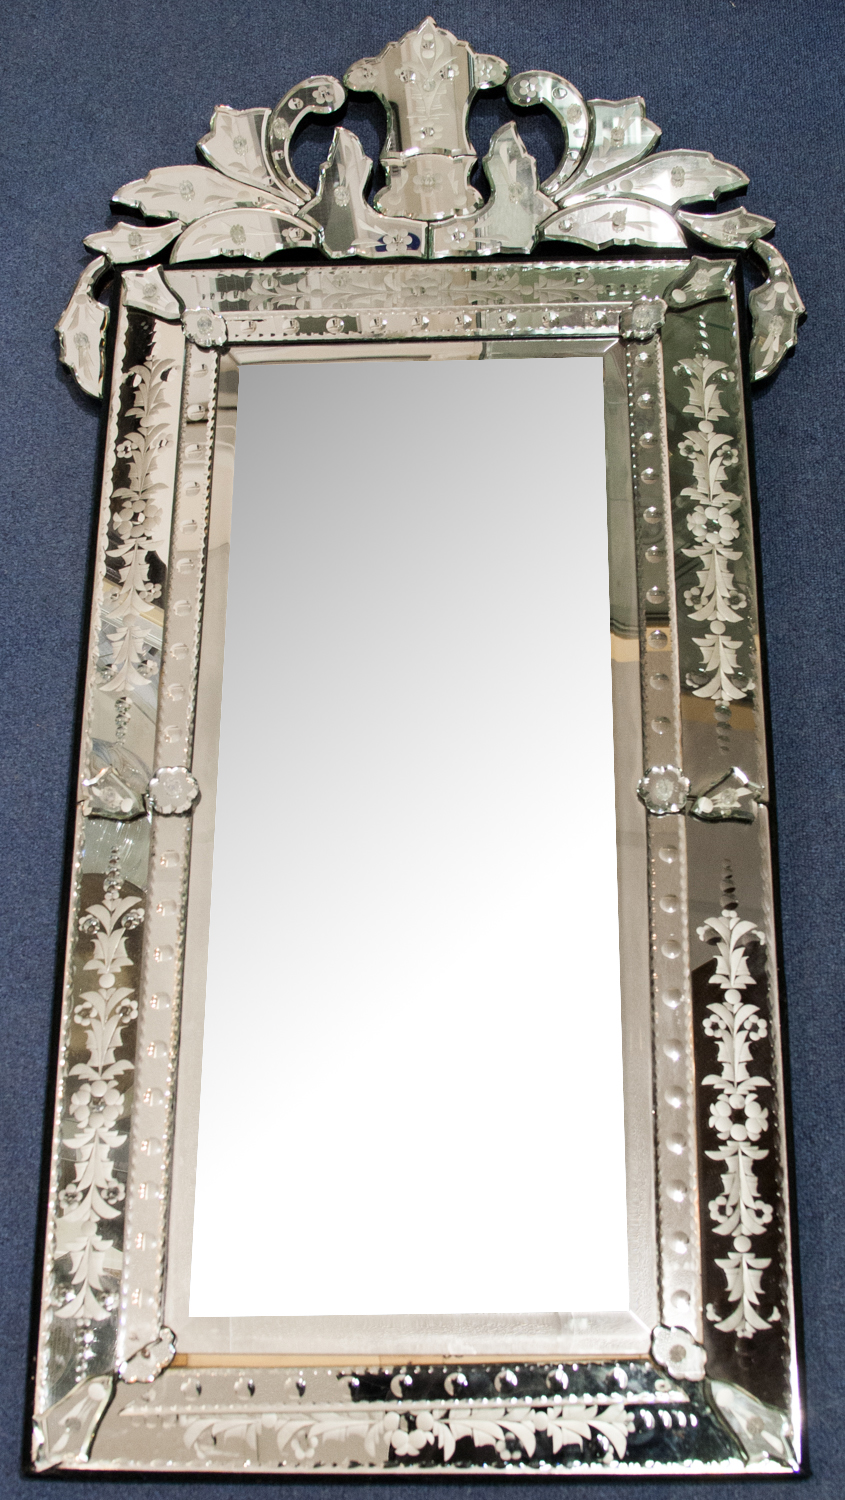 A large Venetian mirror of rectangular form, the frame etched and cut with floral patterns, with